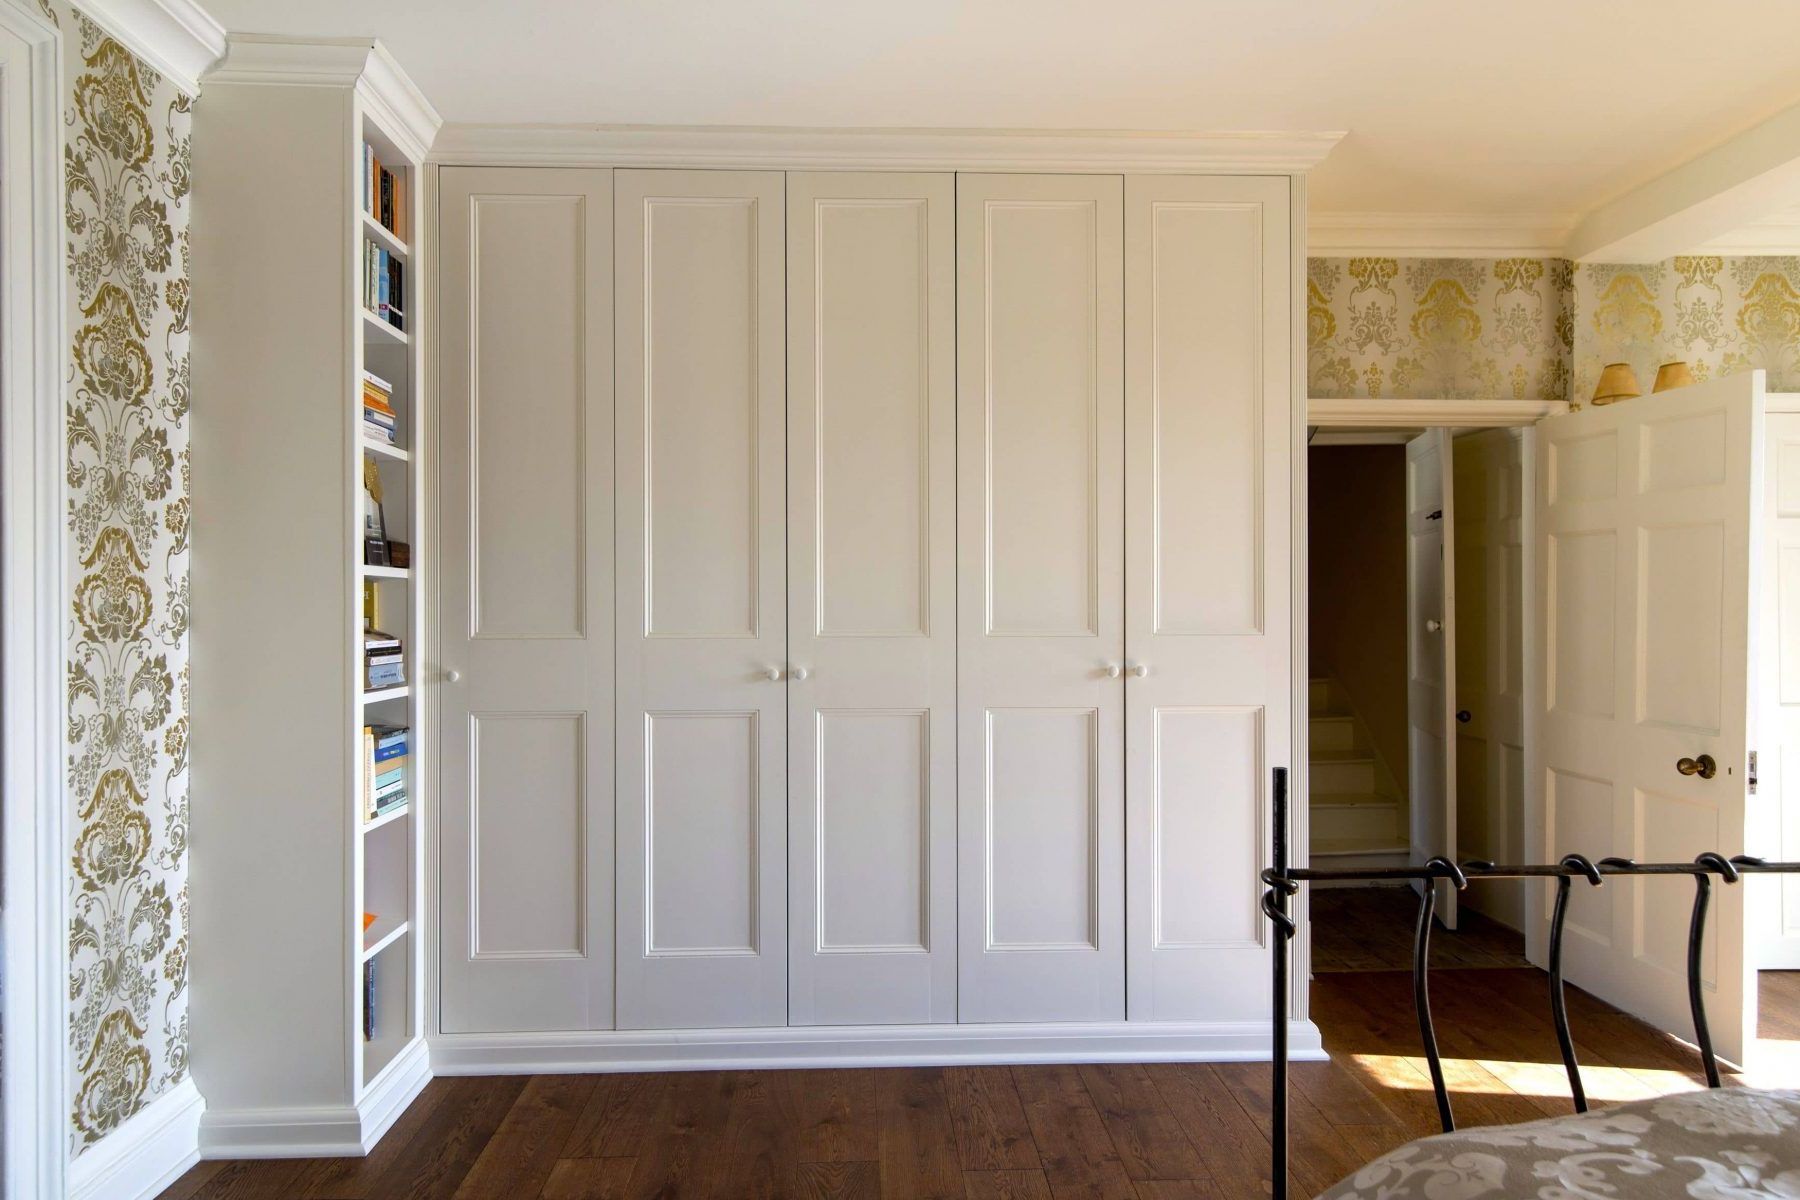 Image Result For Building Fitted Wardrobes Traditional Doors (View 3 of 10)